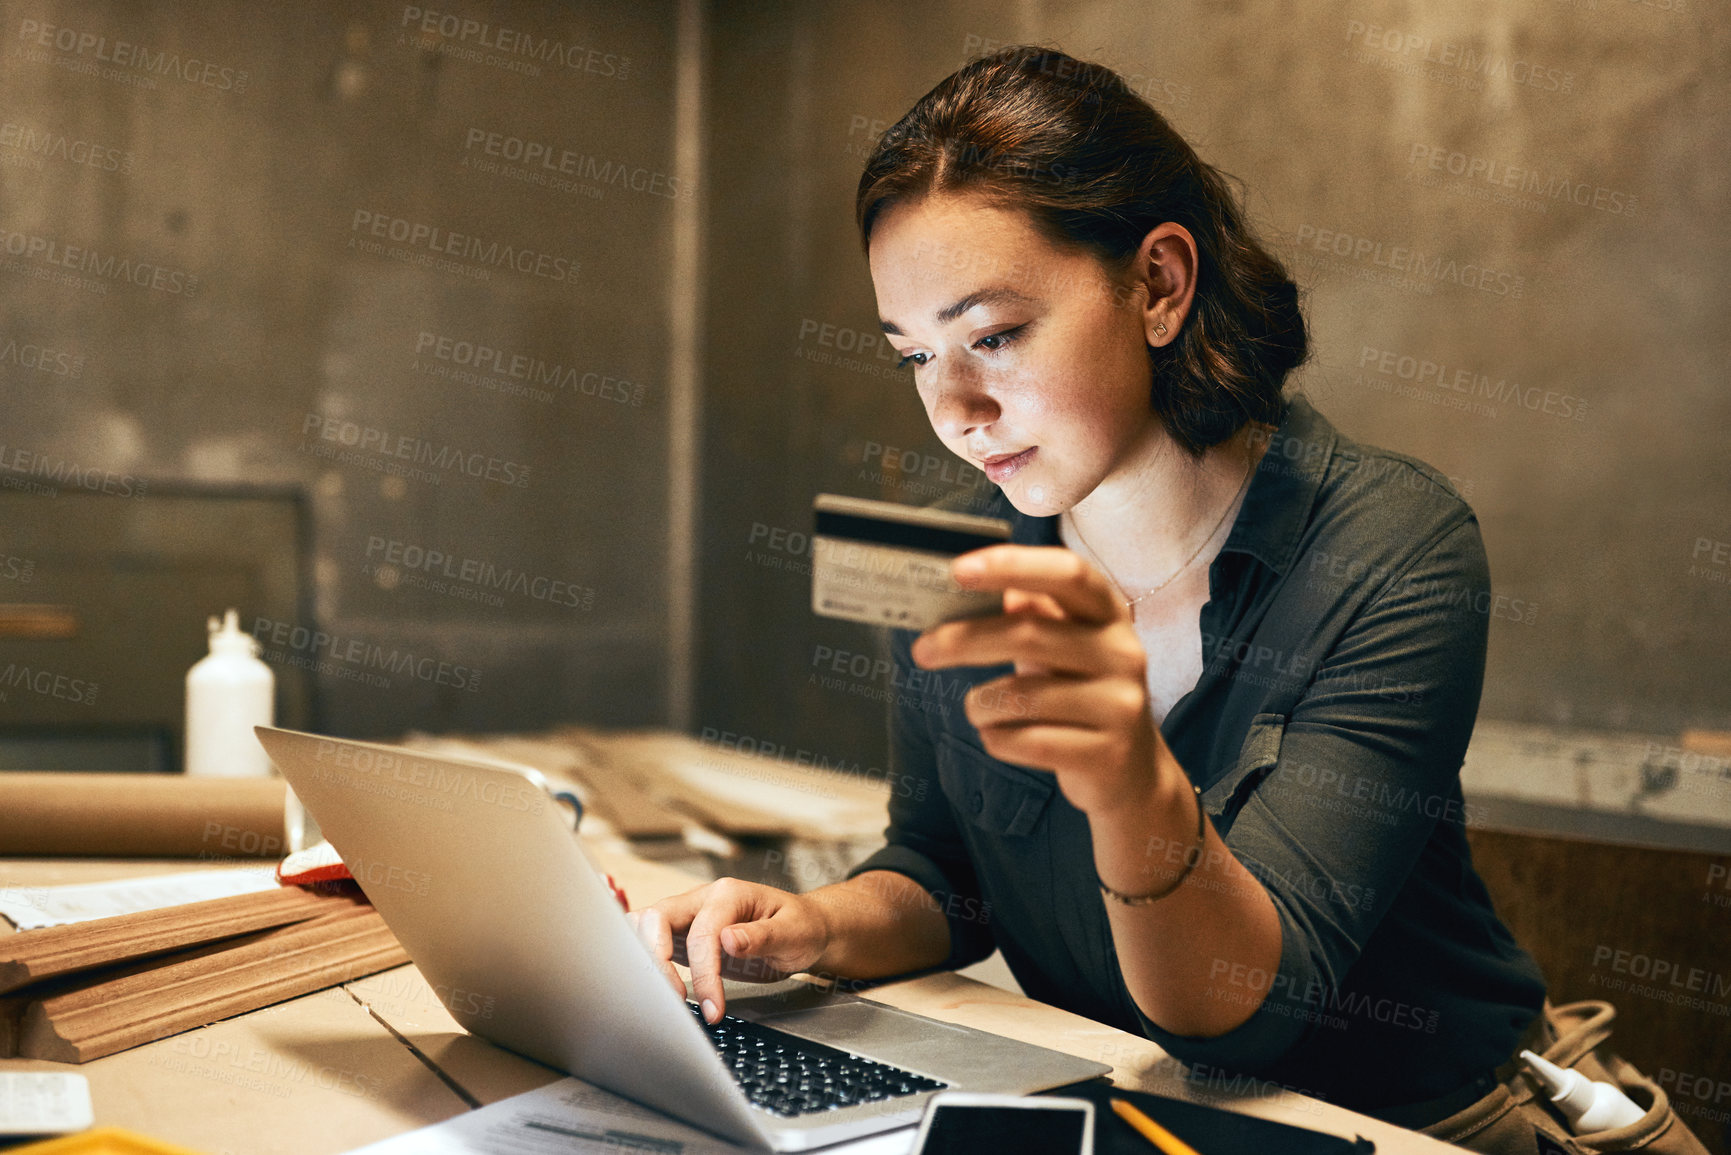 Buy stock photo Cropped shot of an attractive young female carpenter holding her credit card while doing online shopping inside of a workshop at night